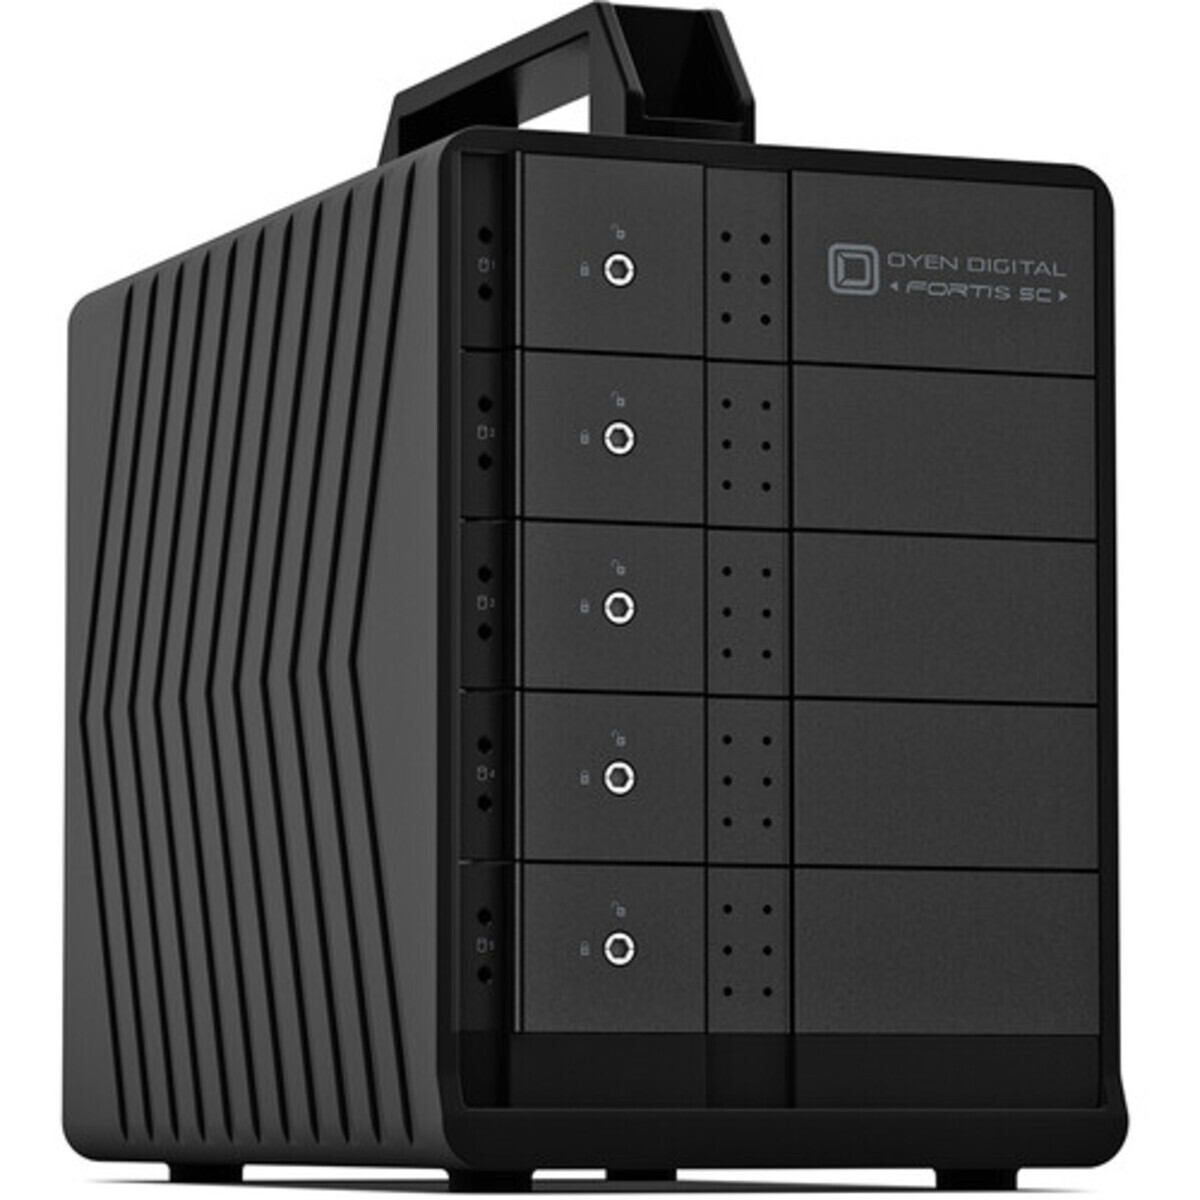 buy OYEN Fortis 5C 10tb Desktop DAS - Direct Attached Storage Device 5x2000gb Seagate IronWolf Pro ST2000NT001 3.5 7200rpm SATA 6Gb/s HDD NAS Class Drives Installed - Burn-In Tested - nas headquarters buy network attached storage server device das new raid-5 free shipping usa spring sale Fortis 5C